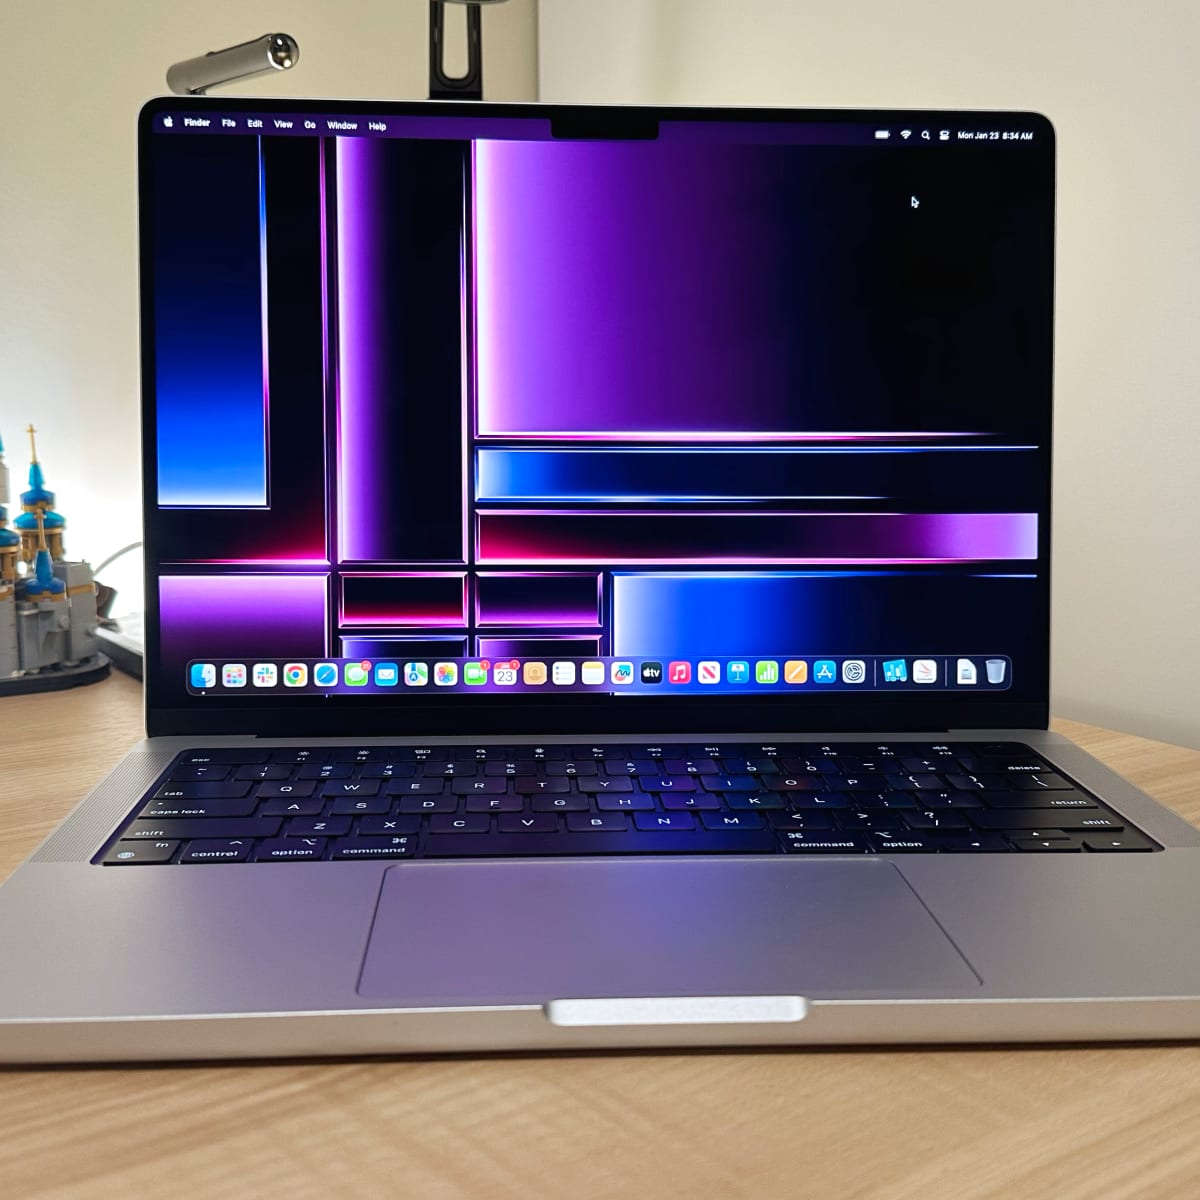 MacBook Pro M1 Max real world review